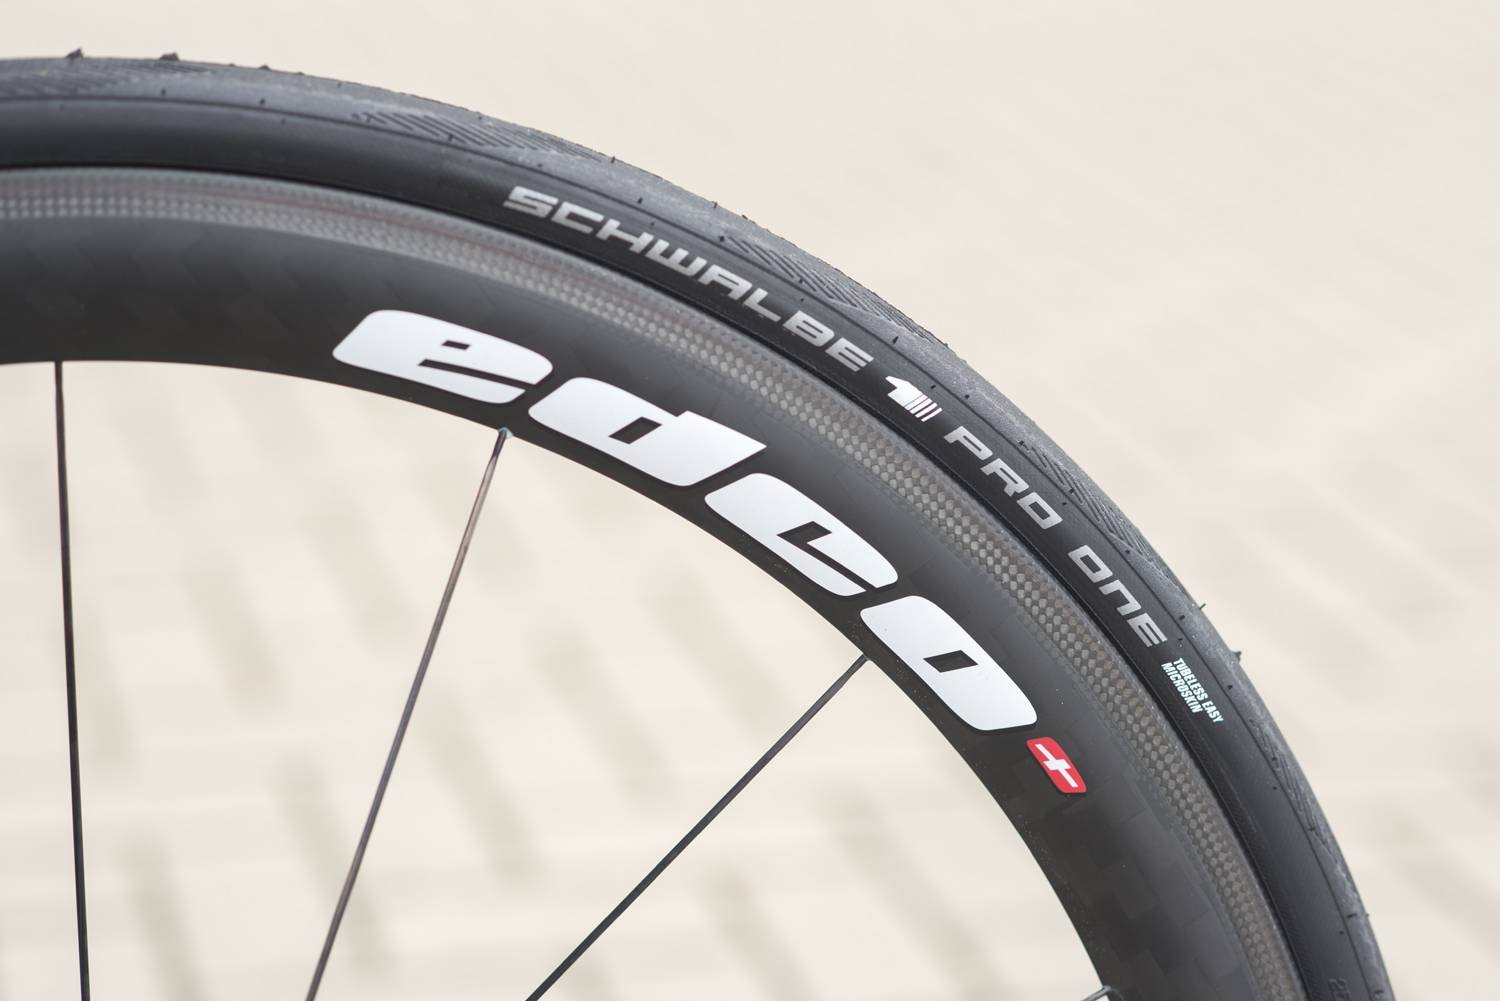 schwalbe pro one tubeless tyres